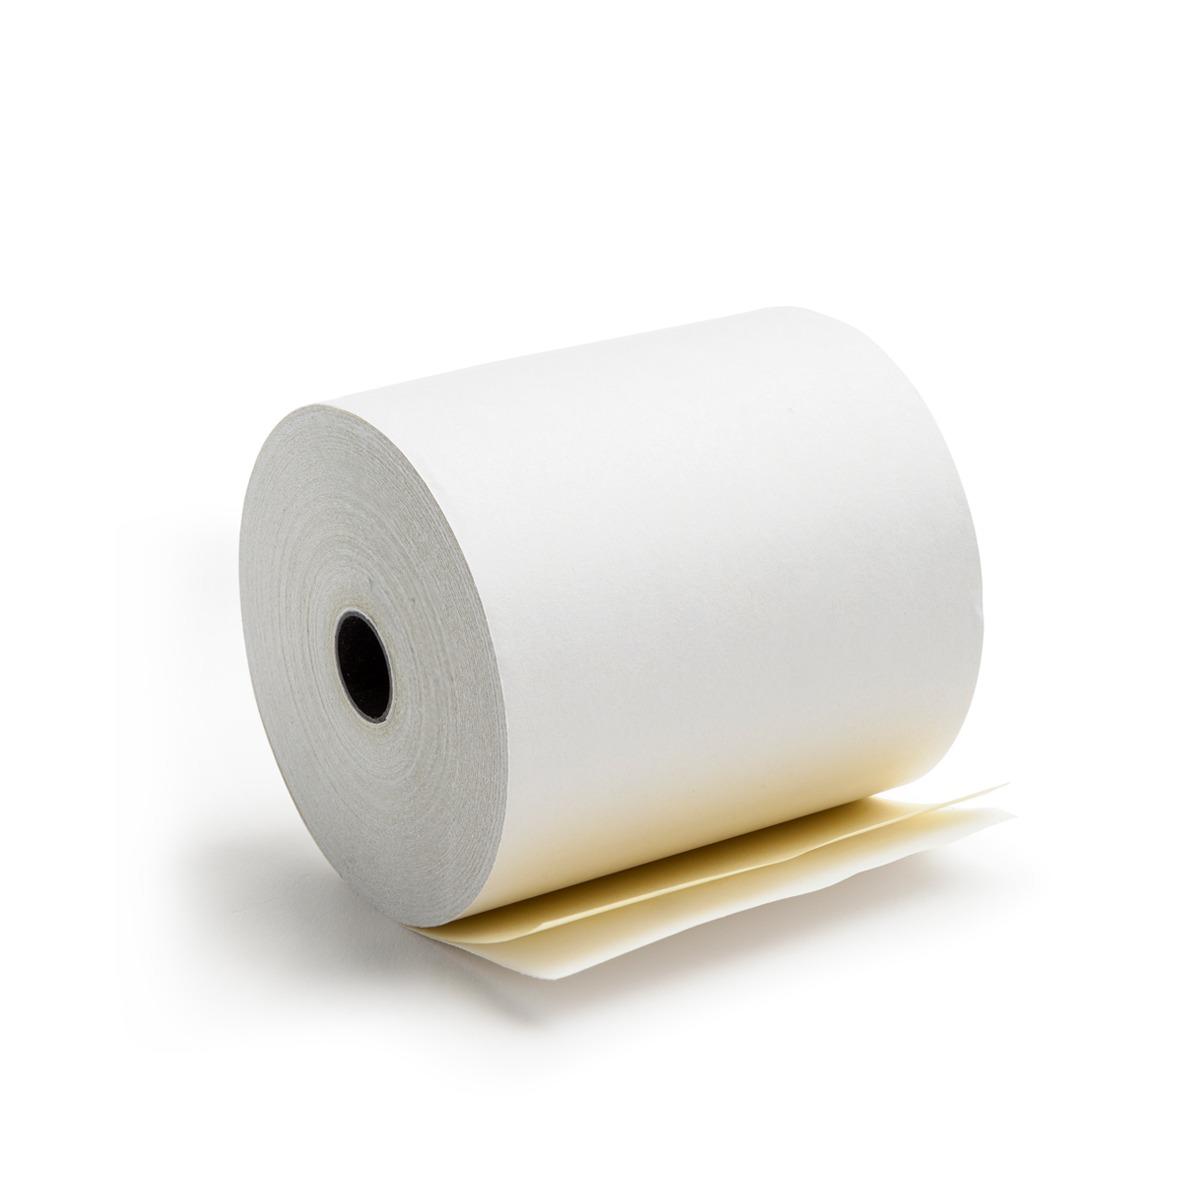 ROLLO PAPEL P/MAQ 57 MM X 30 MTS X 10 QUIMICO MAUGER